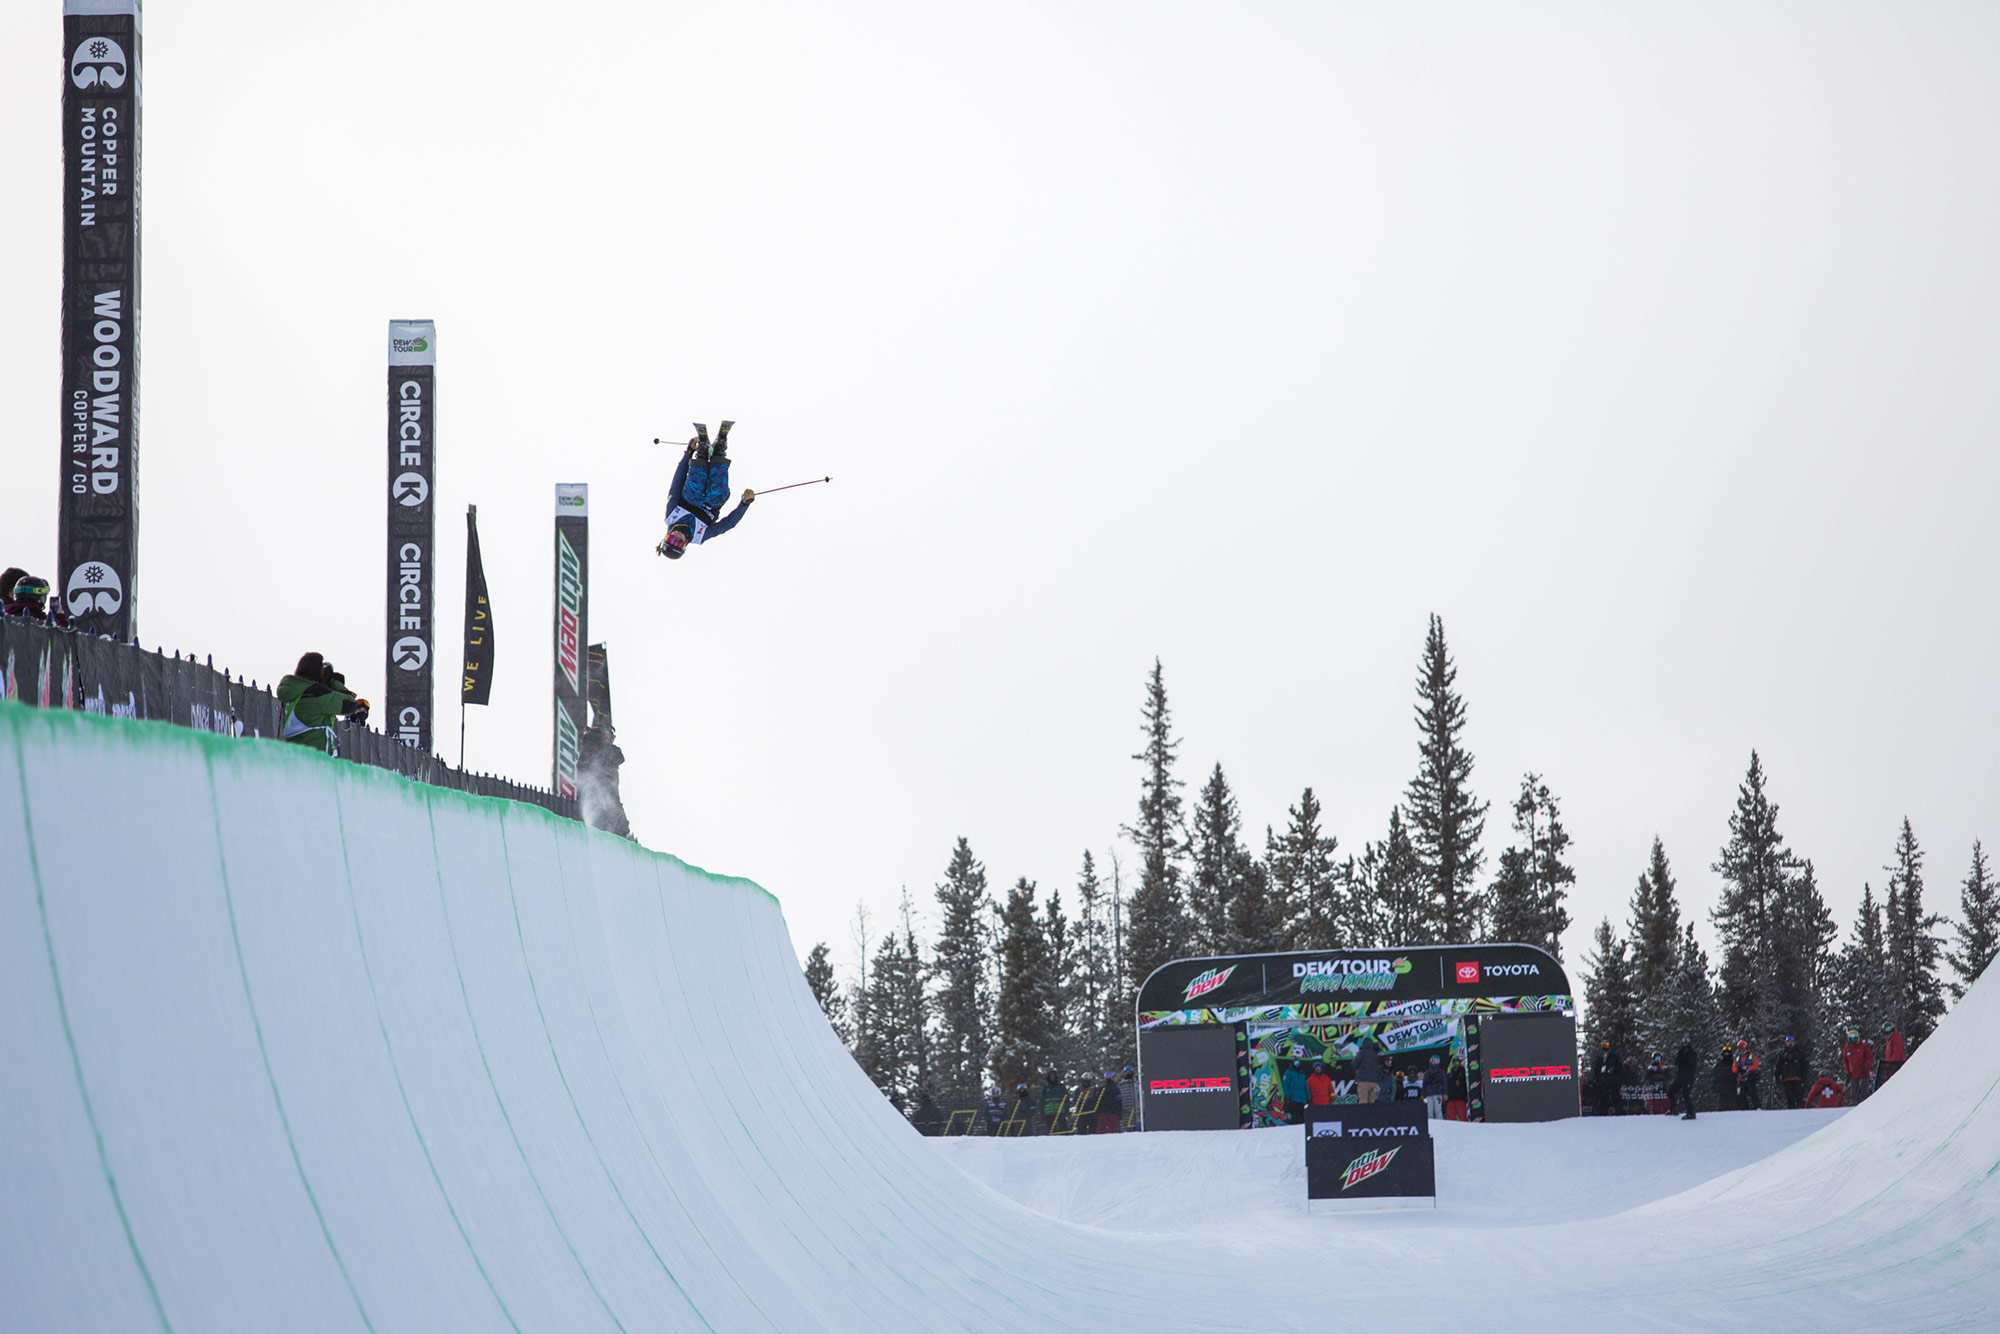 Hanna Faulhaber competes in women's ski halfpipe finals at the 2021 Winter Dew Tour.